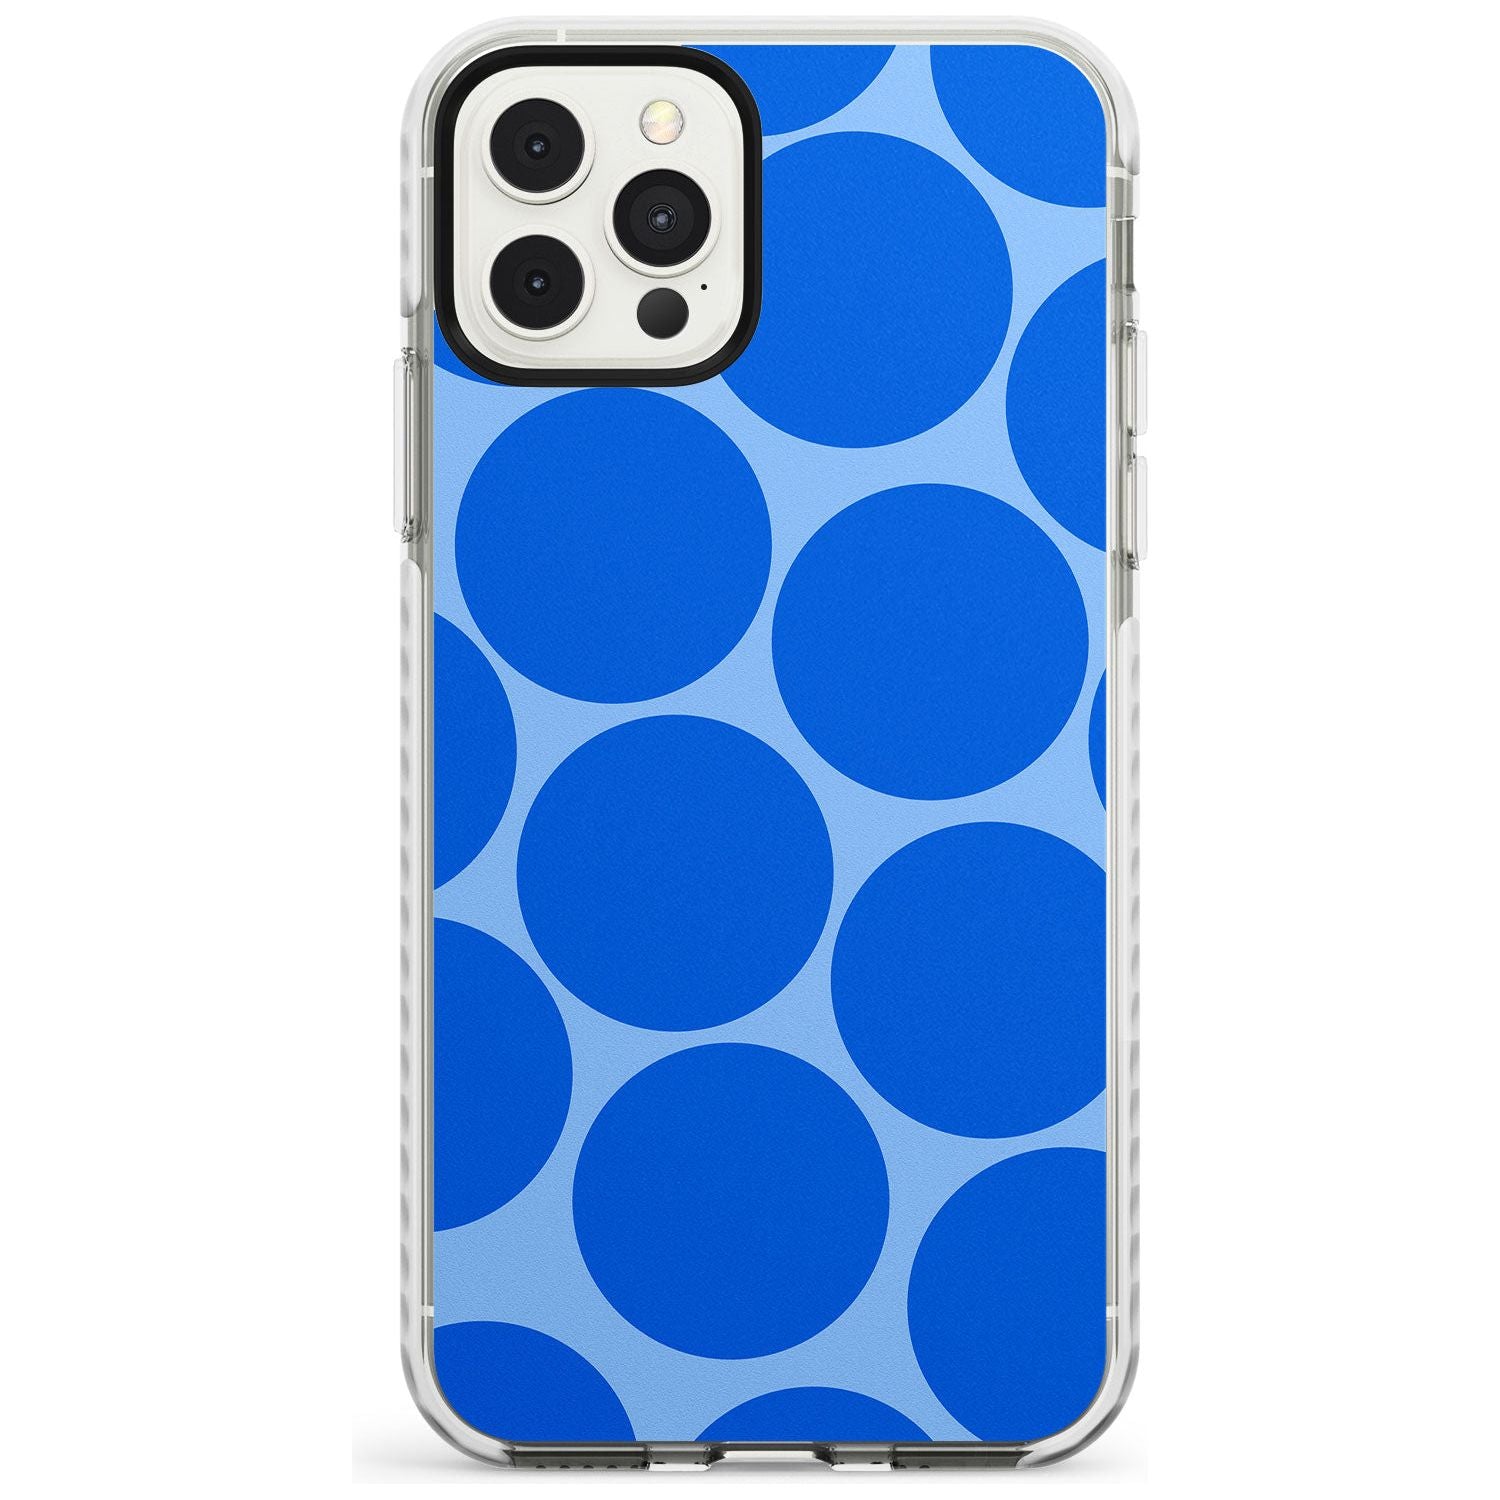 Abstract Retro Shapes: Blue Dots Slim TPU Phone Case for iPhone 11 Pro Max